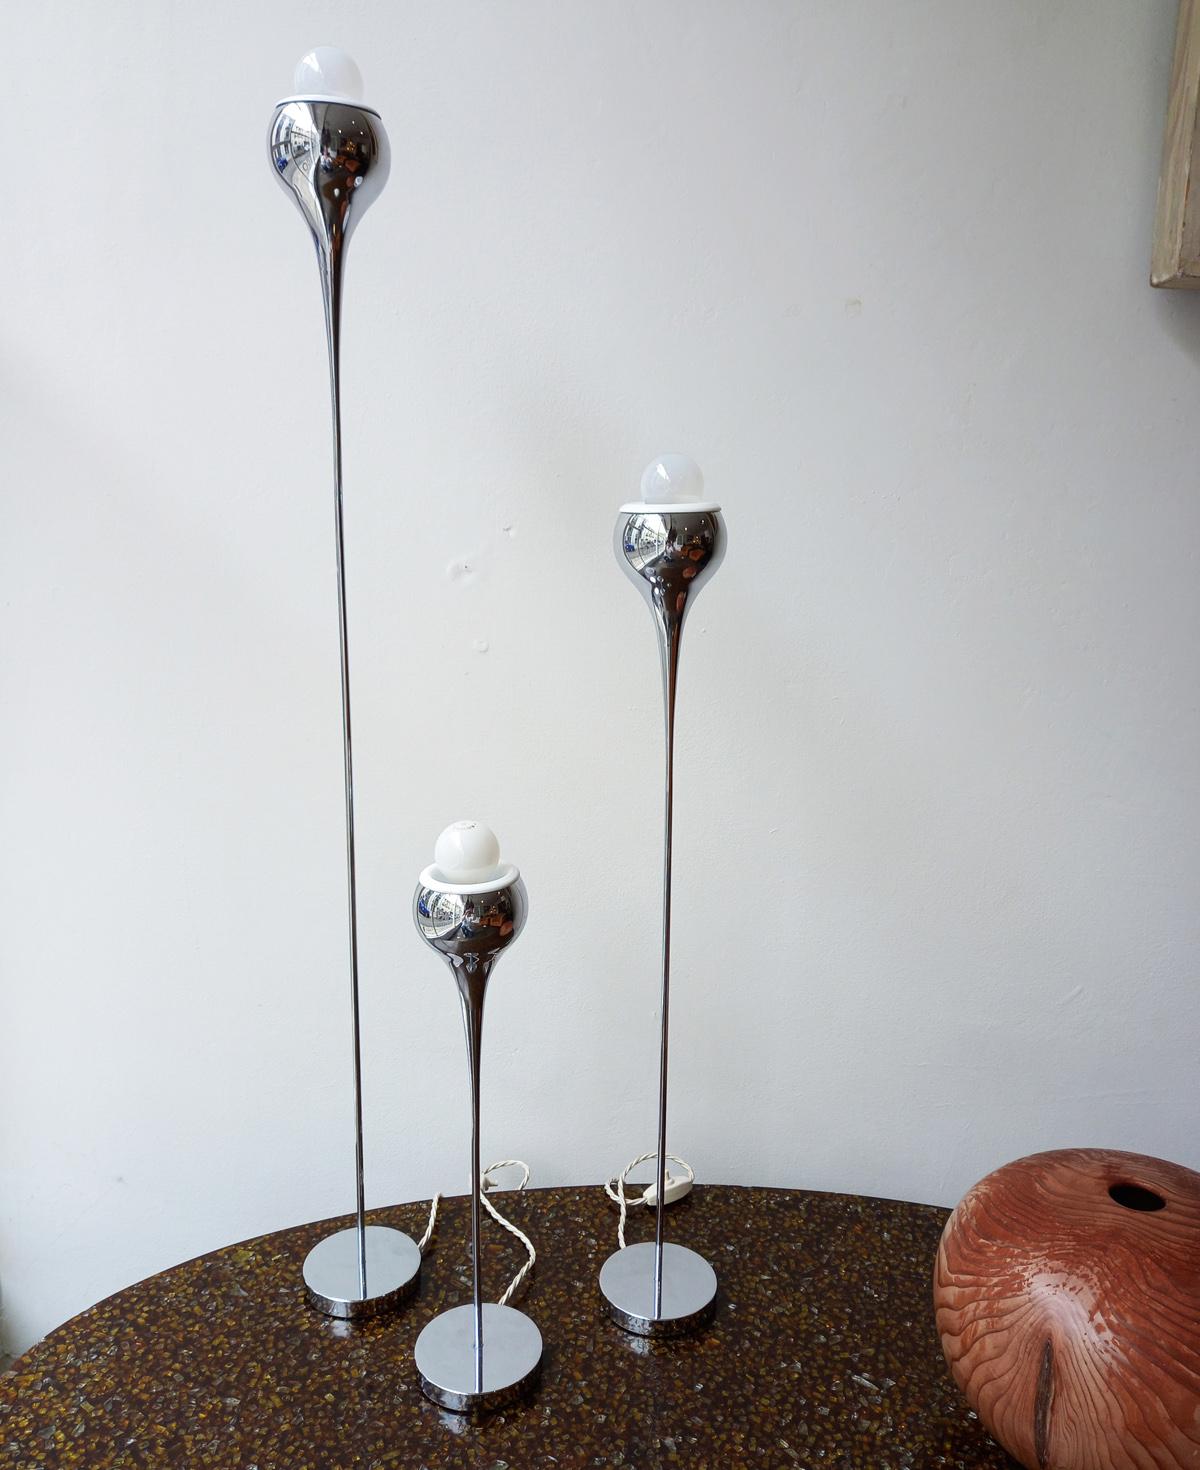 Att. Angelo Brotto, elegant set of chromed table lamps, or floor lamps, Italy circa 1970s made by Esperia, Poggibonsi. In a chromed finish and white enamel top ring. Newly rewired with beige fabric twisted cables and light switch, E17 bulbs.